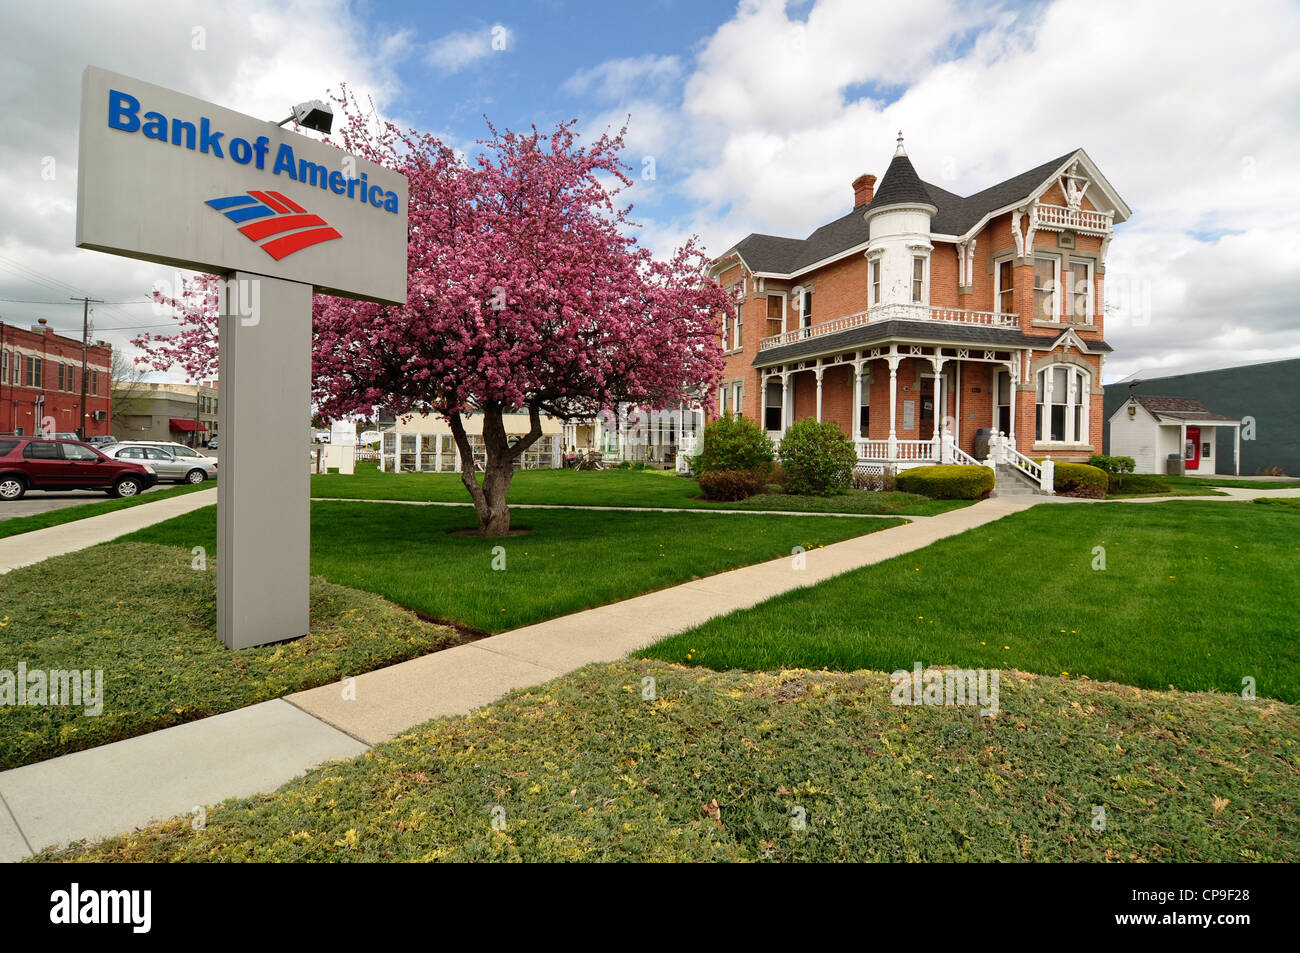 Bank of America housed in an old Victorian building in Baker City, Oregon. Stock Photo